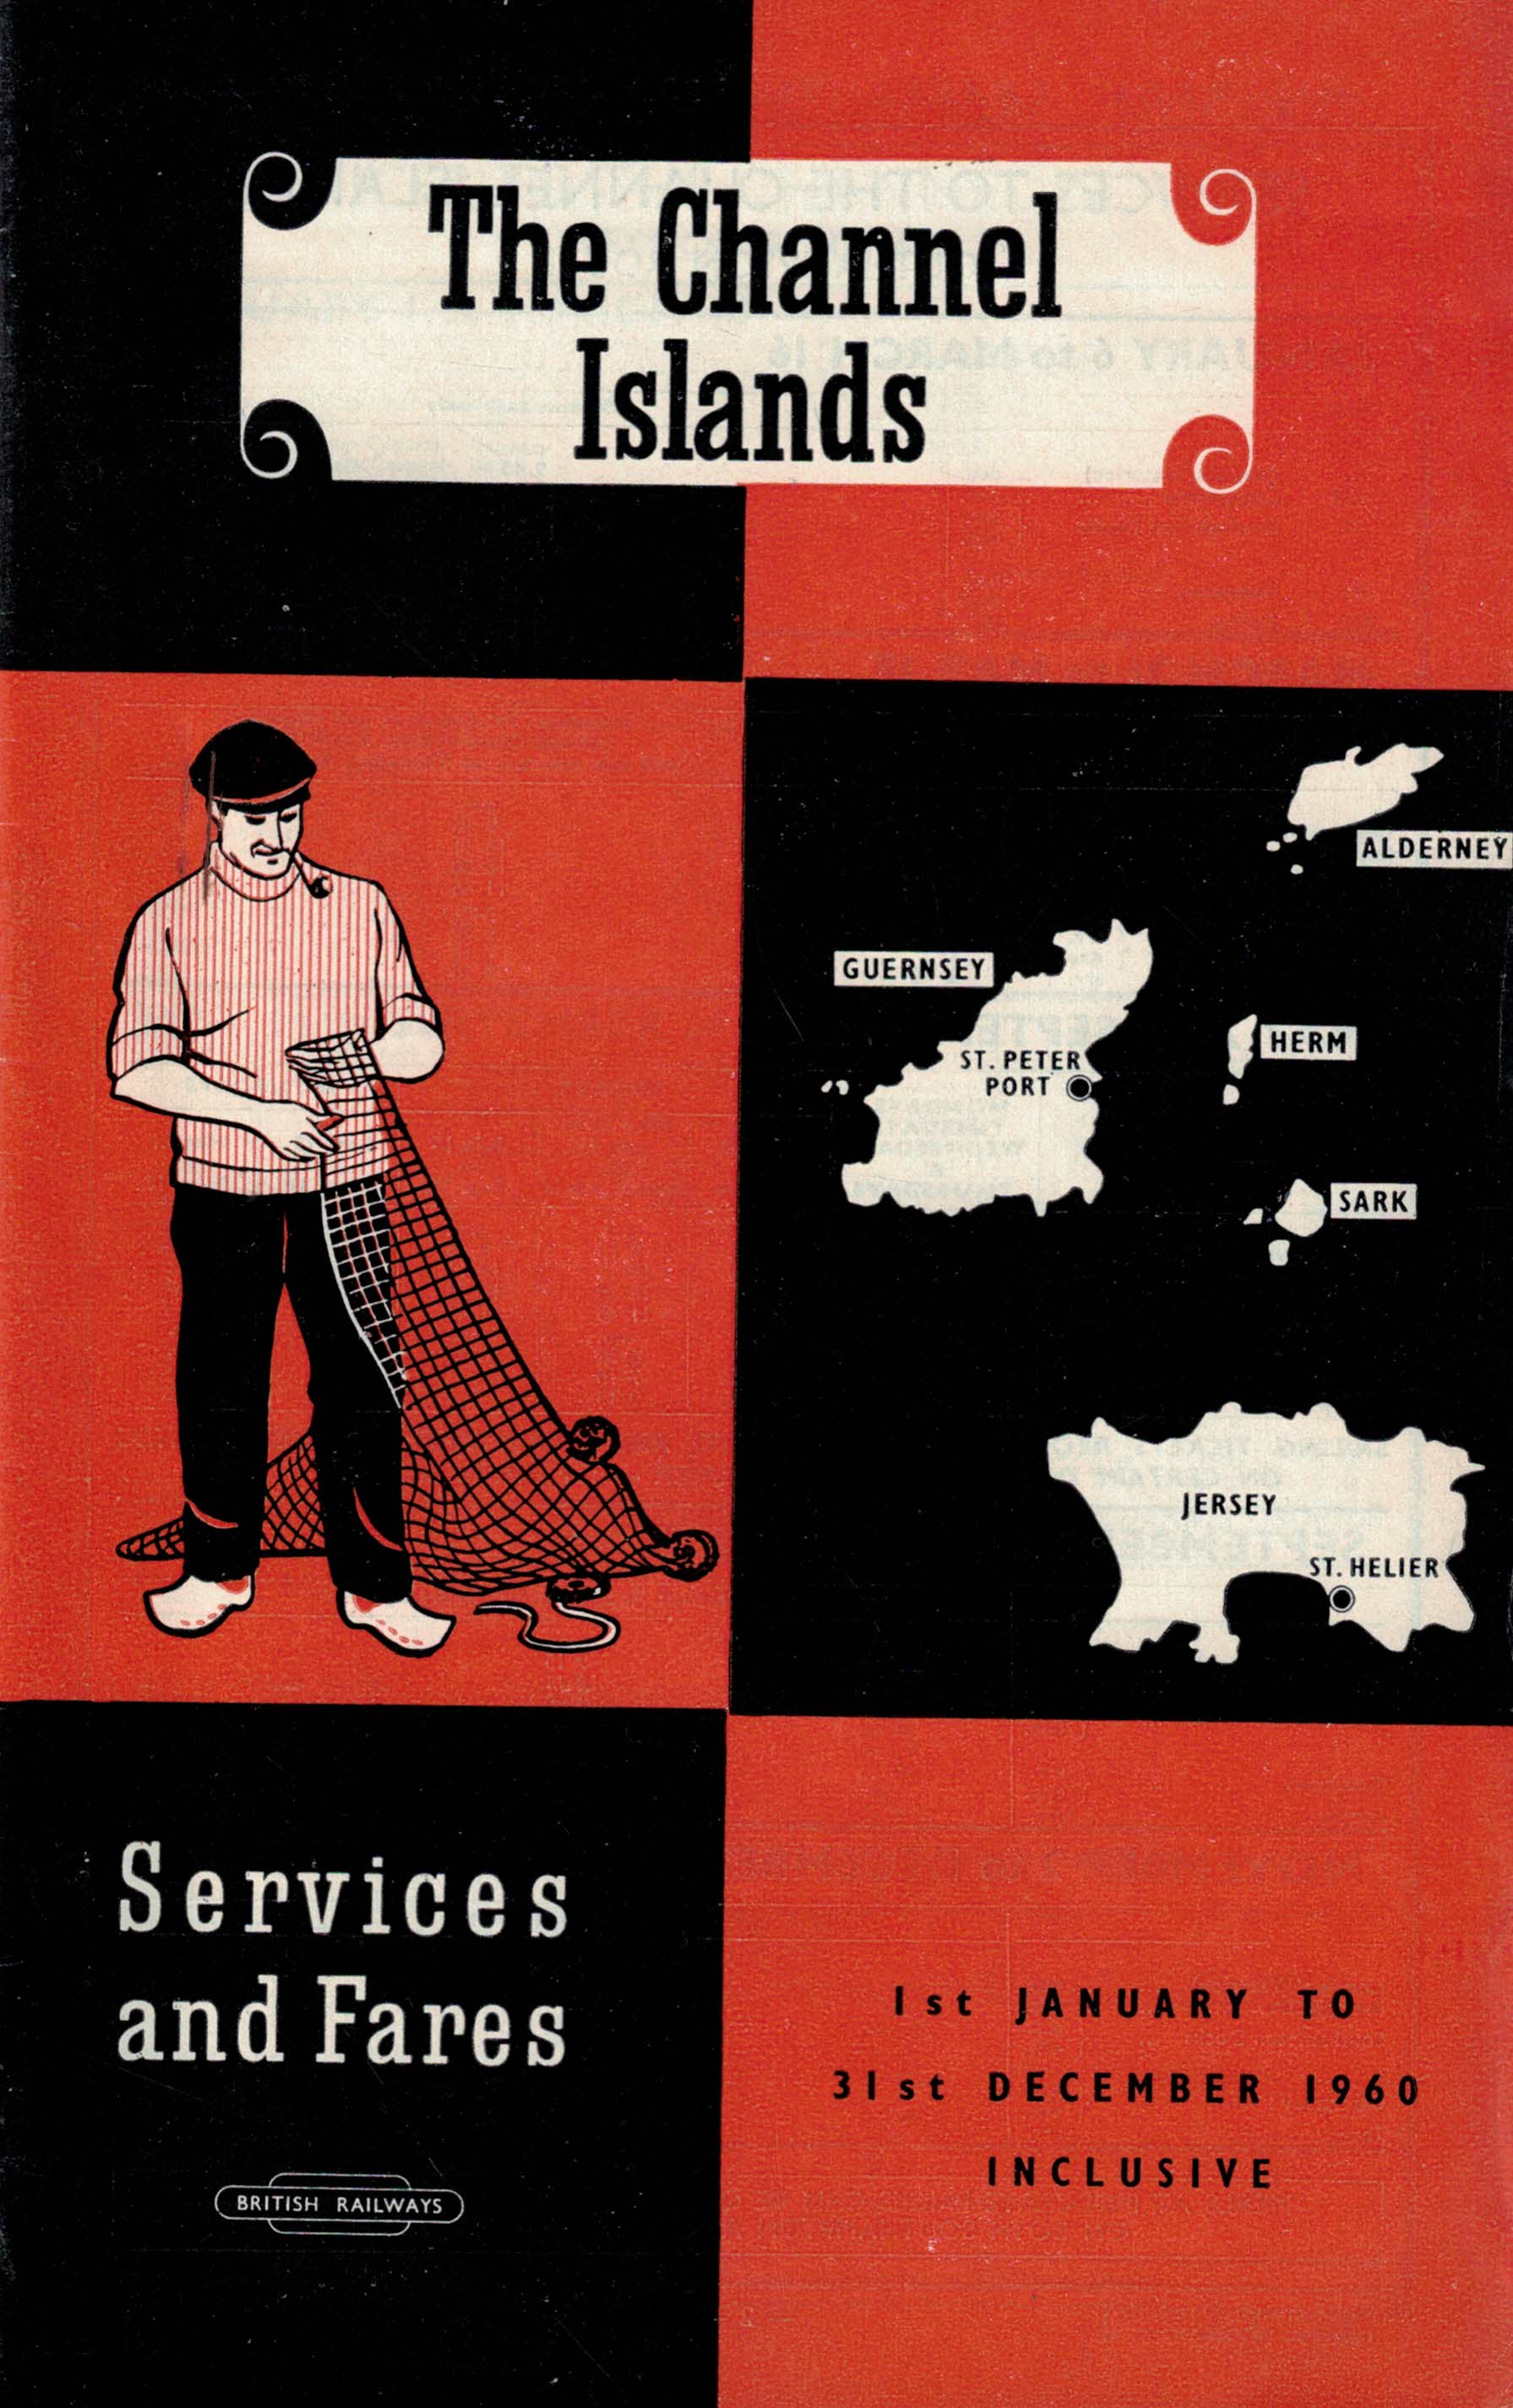 The Channel Islands. Services and Fares. 1st January to 31st December 1960 Inclusive.